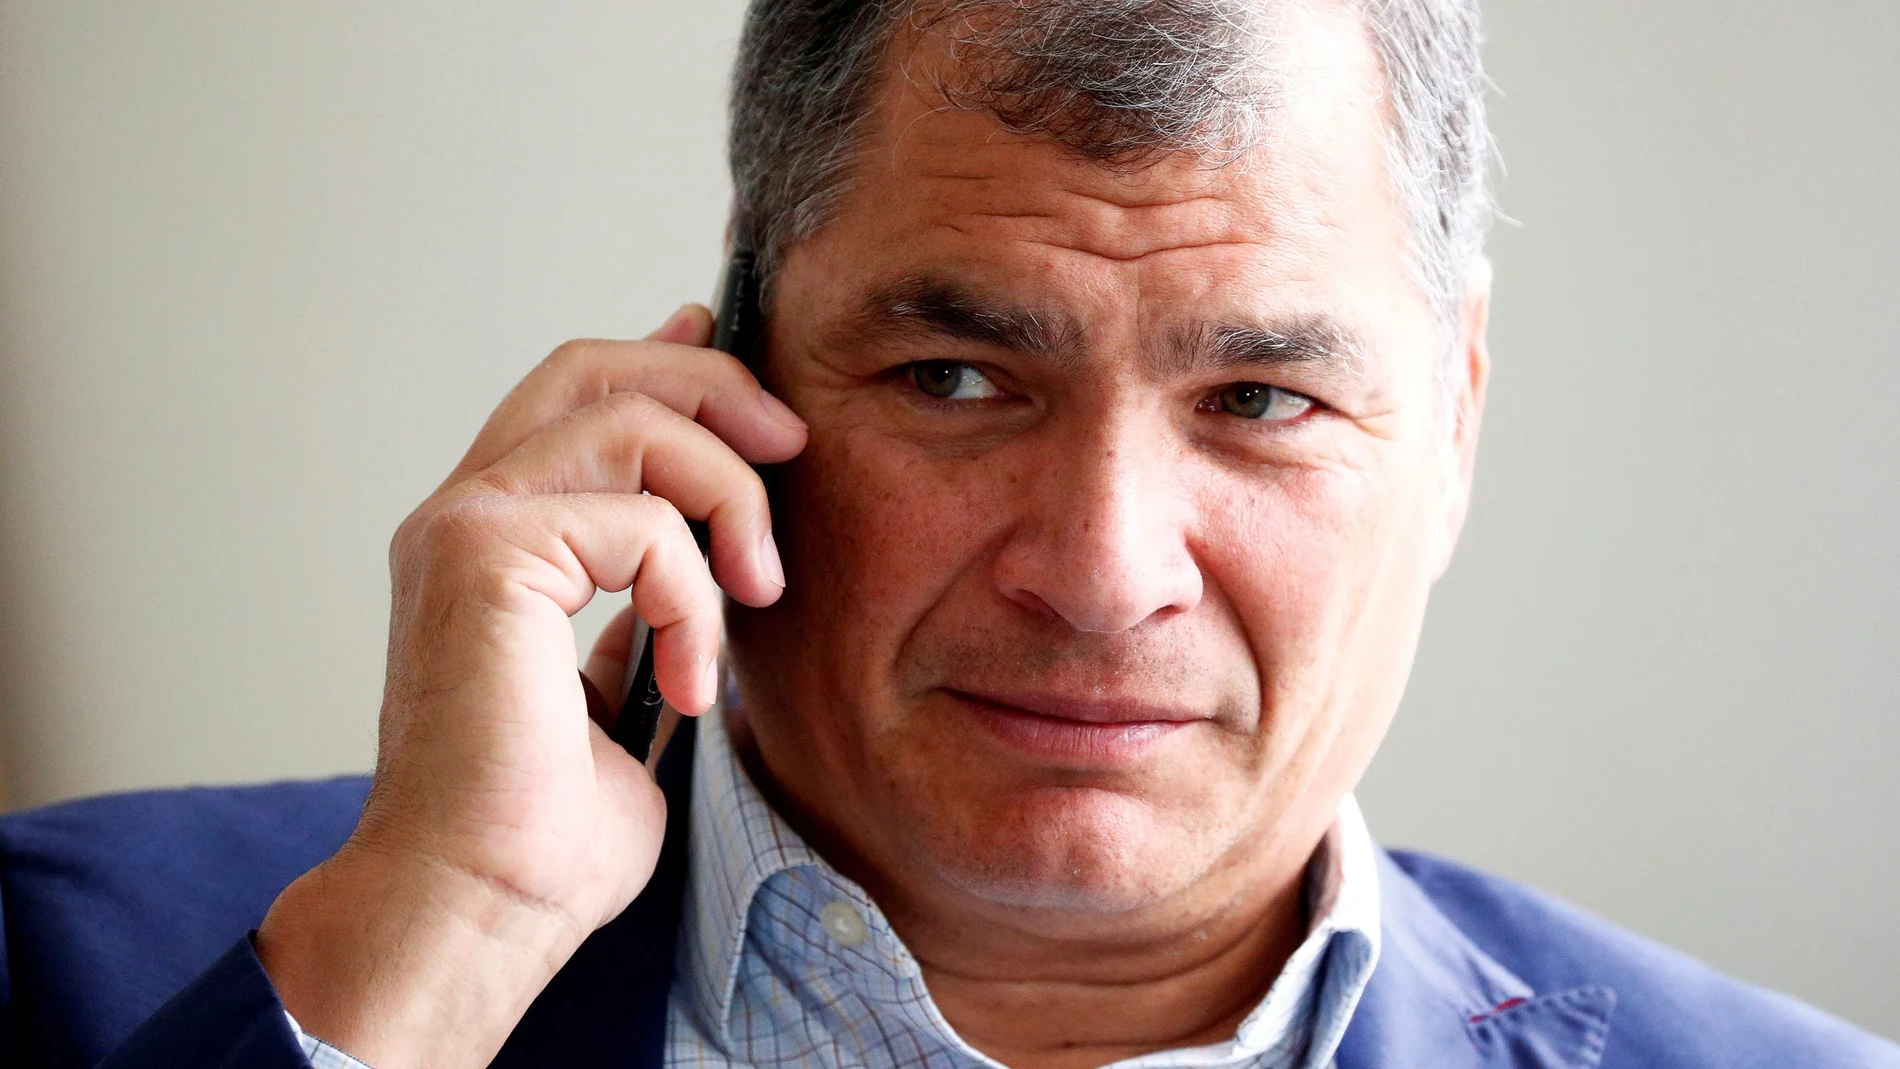 FILE PHOTO: Ecuador's former president Correa is pictured ahead of an interview with Reuters in Brussels